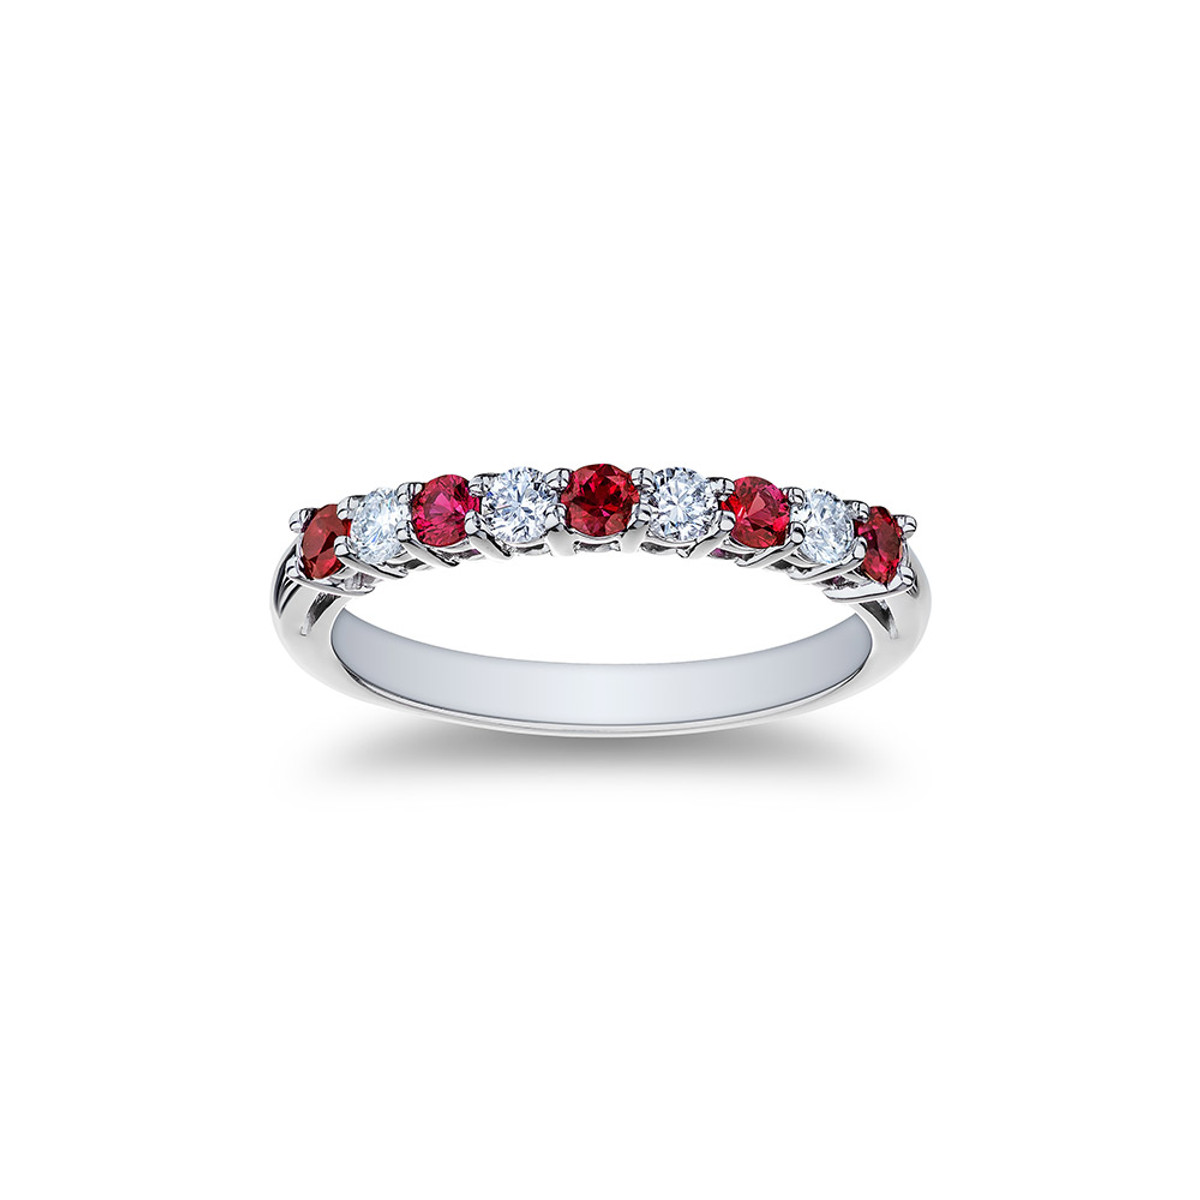 PLATINUM DIAMOND AND RUBY BAND 4RB=0.24CTTW 5RUBY=0.42CTTW-43302